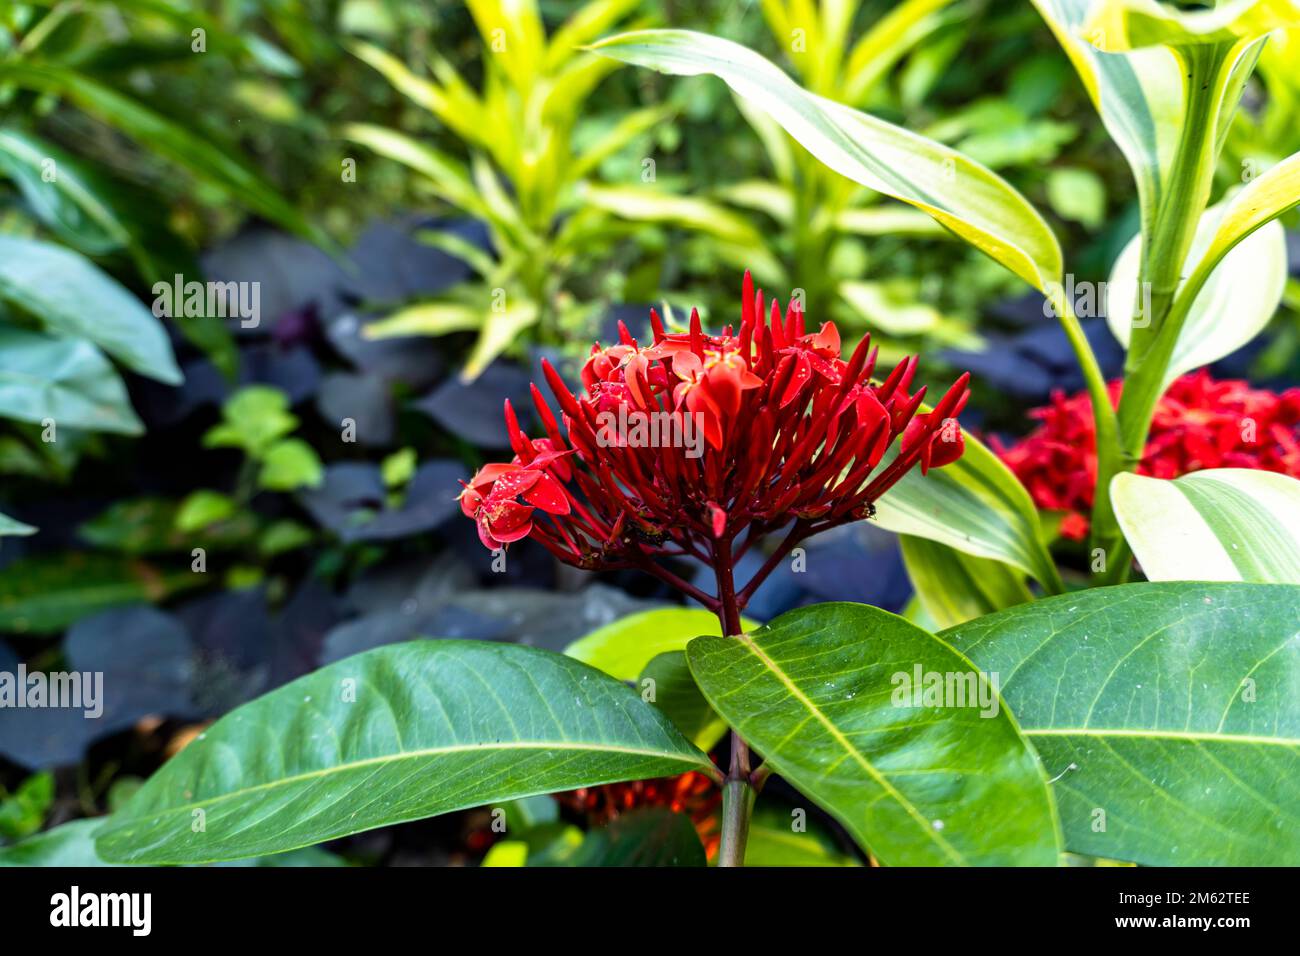 a species of flowering plant in the family Rubiaceae. Scientific name is Ixora coccinea Stock Photo